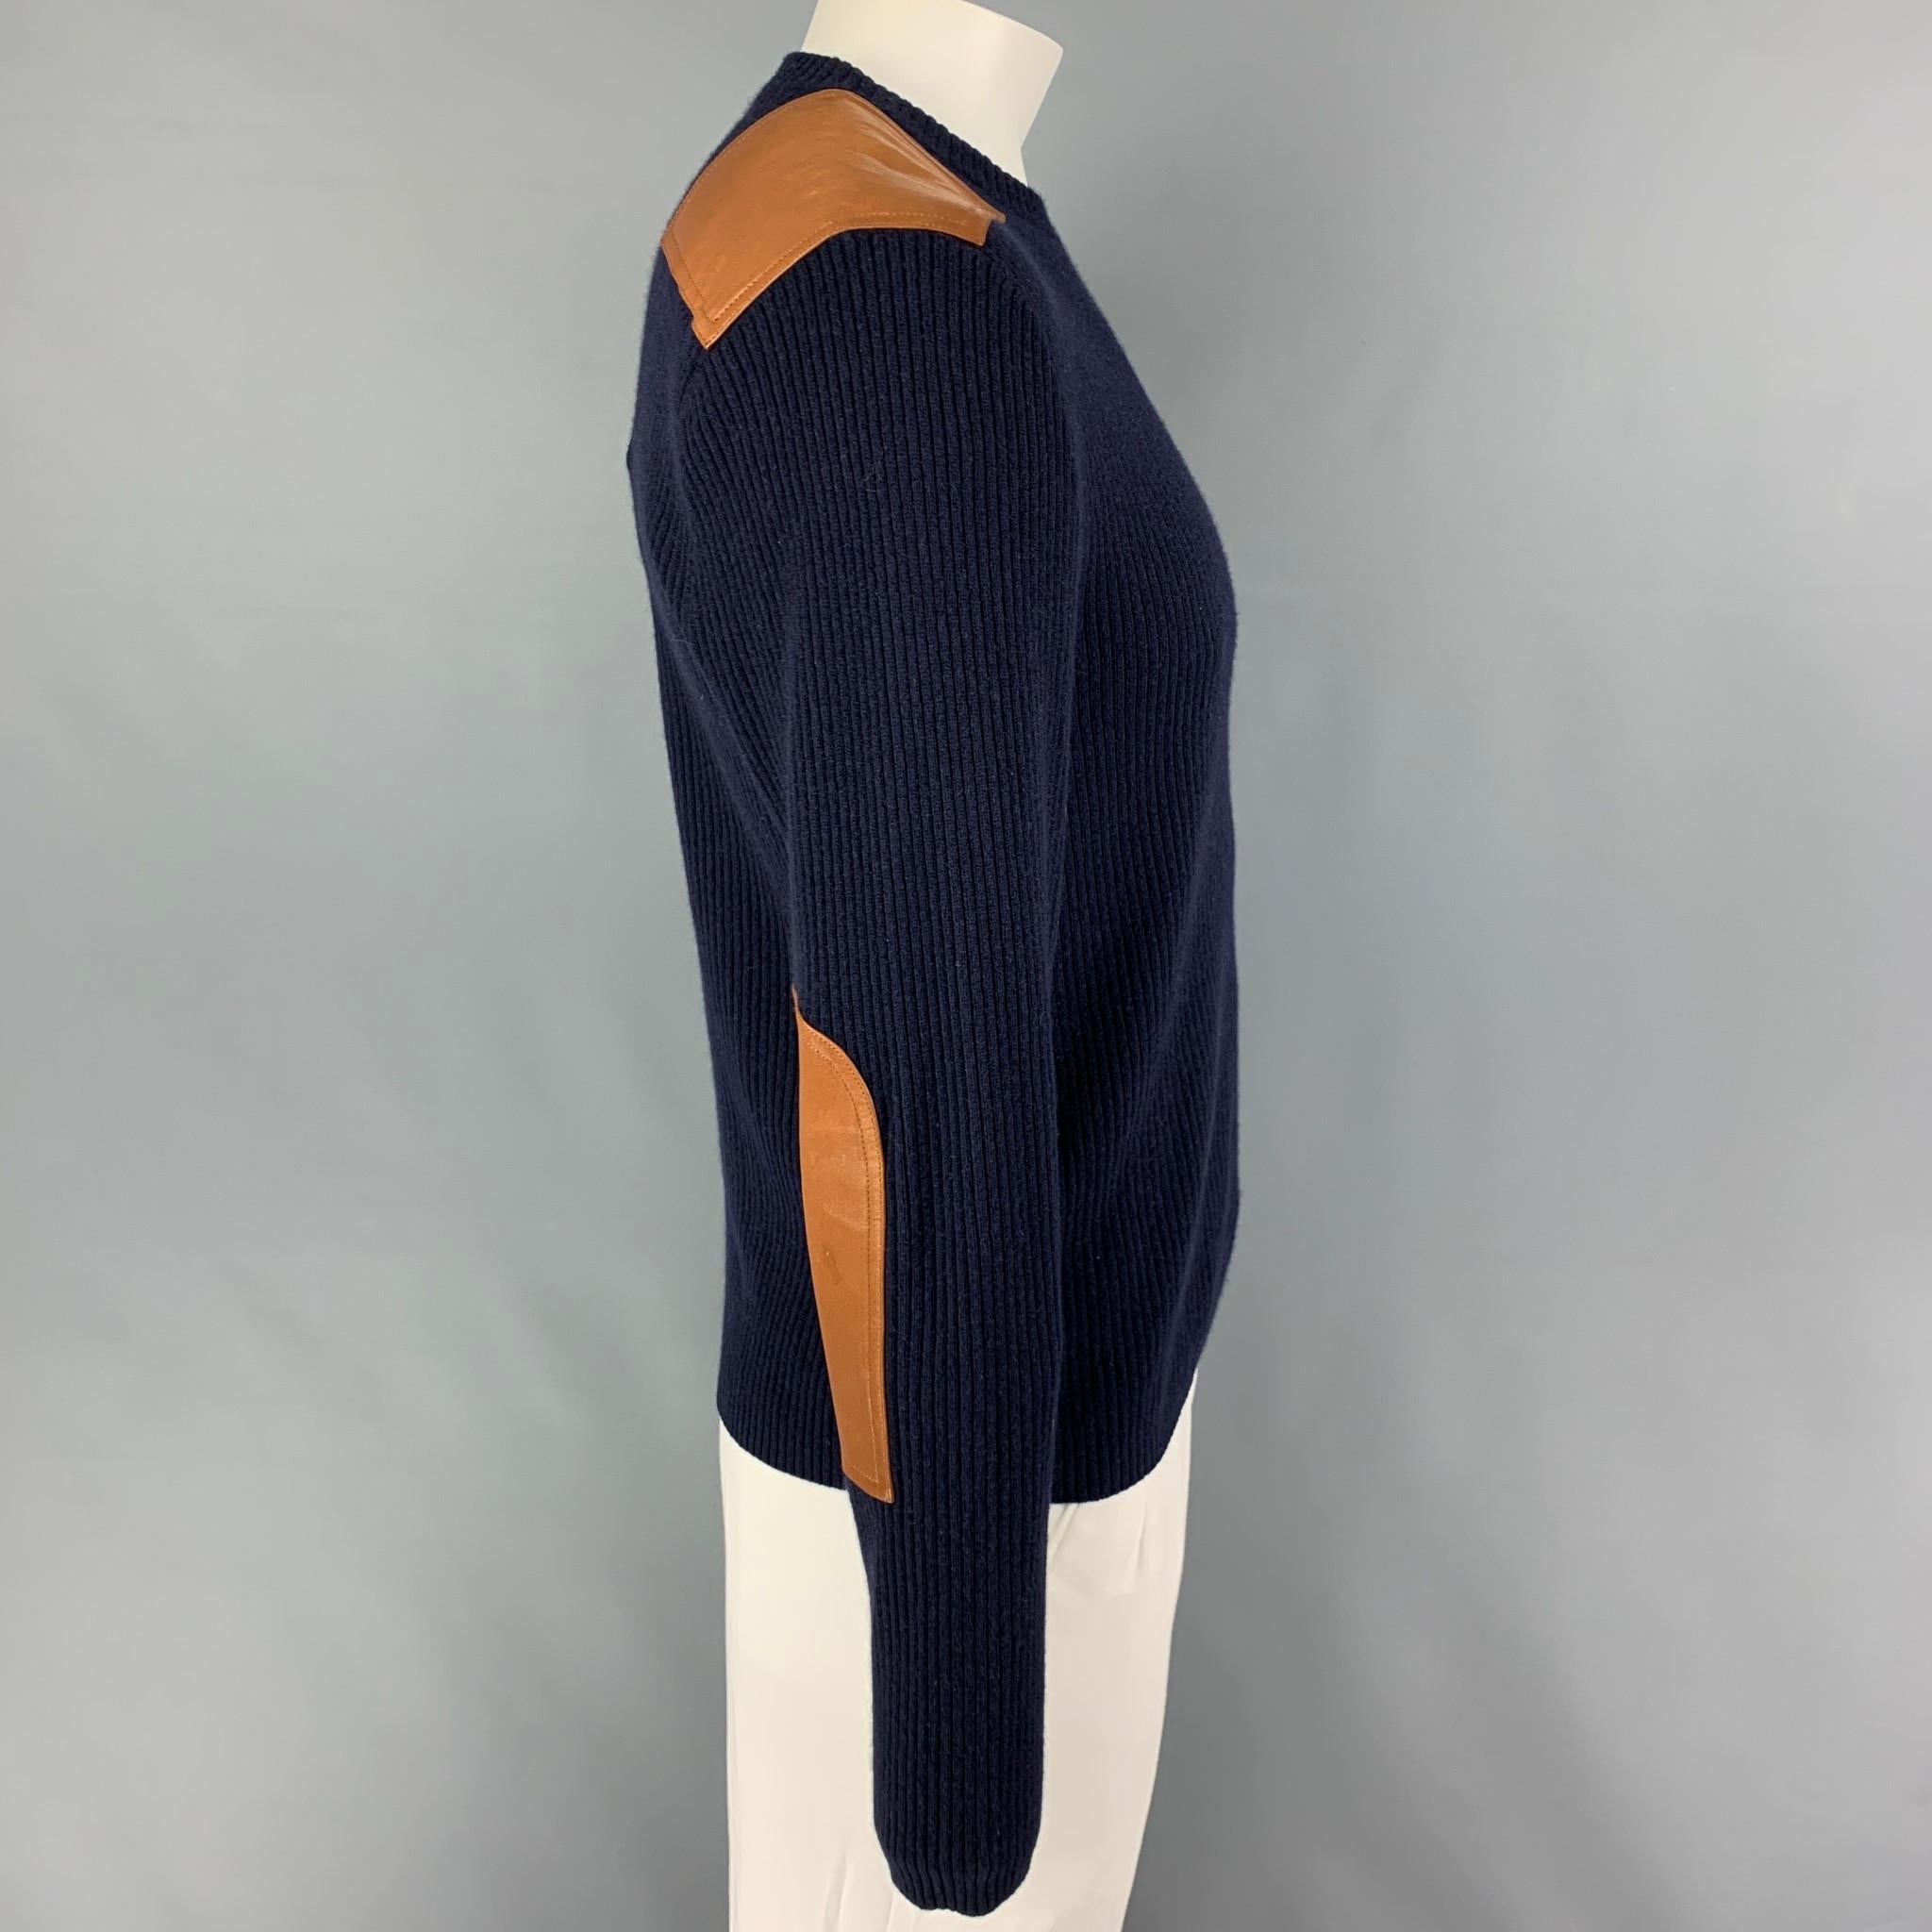 POLO by RALPH LAUREN sweater comes in a navy cashmere featuring tan leather patches and a crew-neck. 

Very Good Pre-Owned Condition.
Marked: L

Measurements:

Shoulder: 19.5 in.
Chest: 42 in.
Sleeve: 27 in.
Length: 25.5 in. 